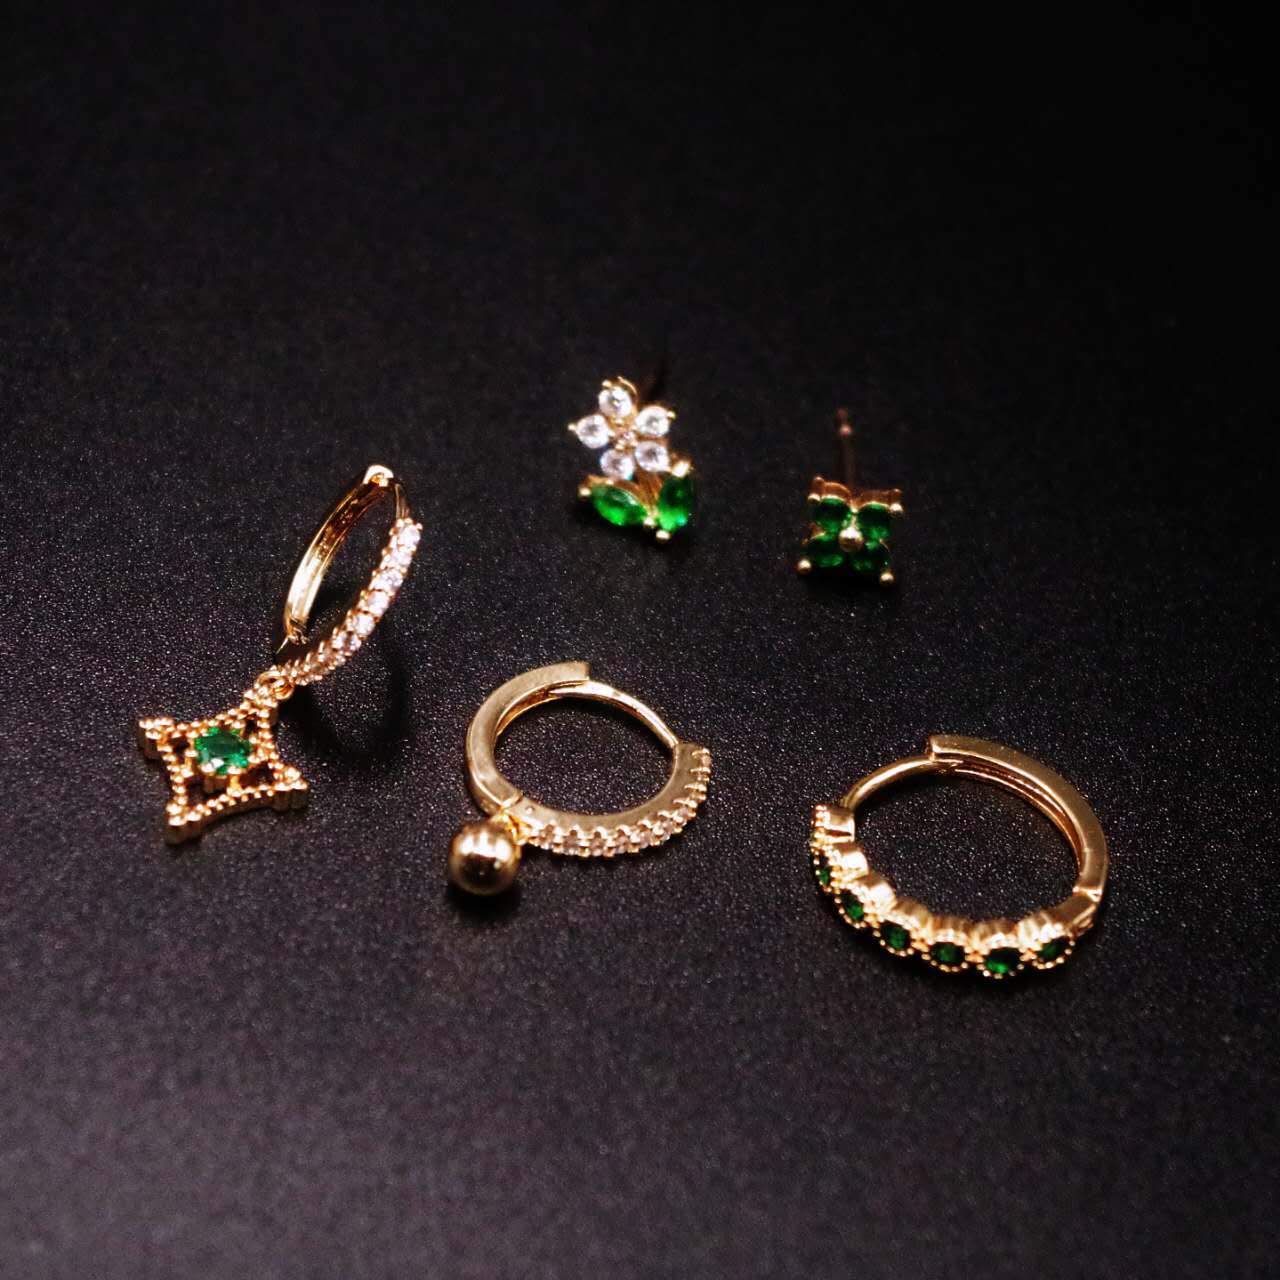 Fashionable earring sets for office & daily wear | Business Insider India